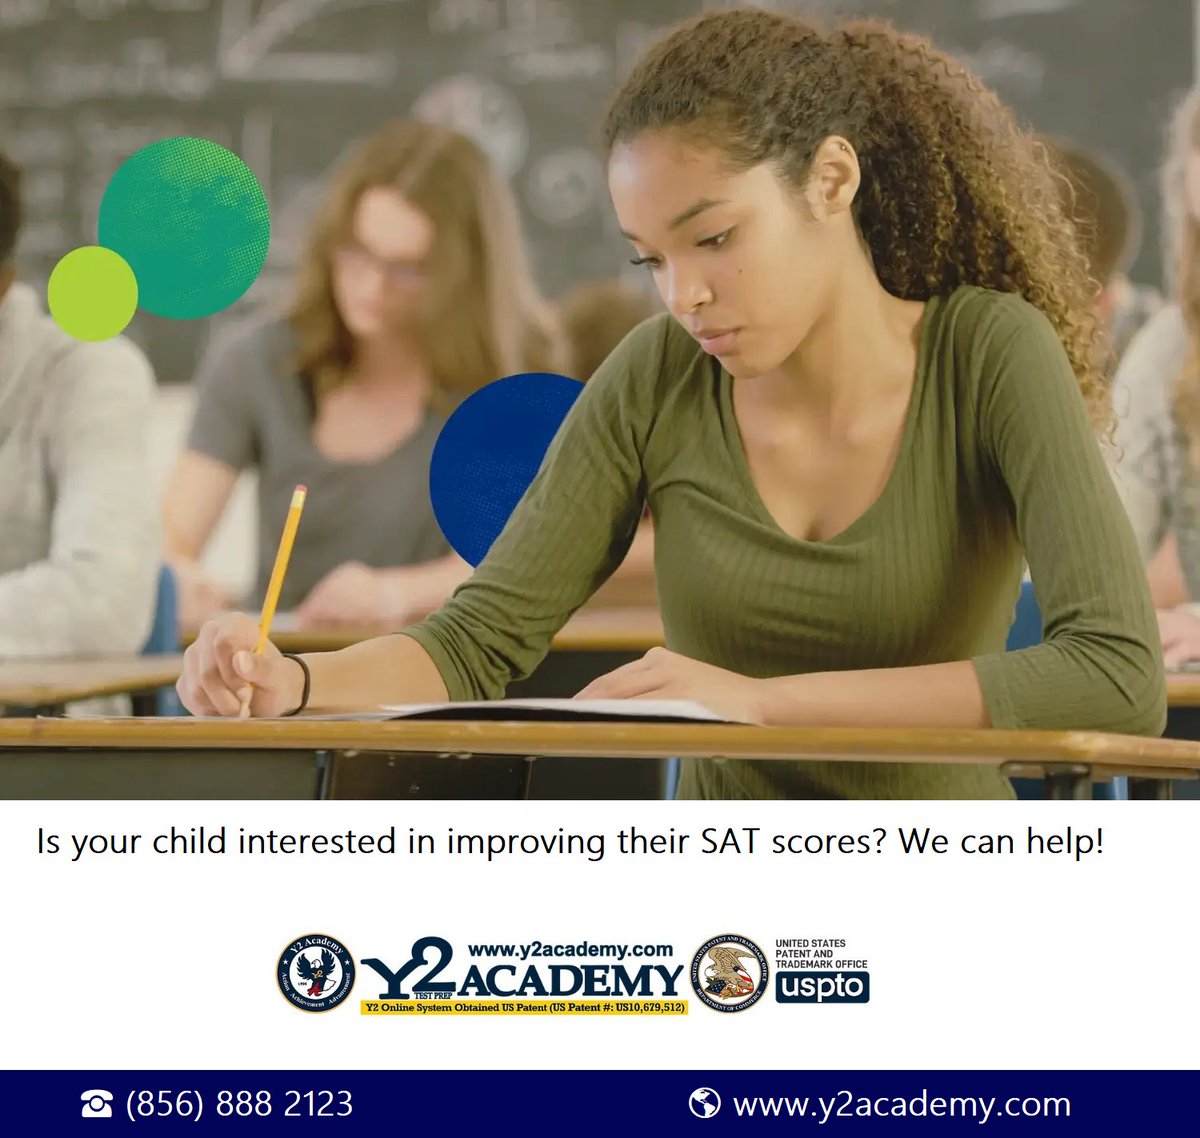 Is your child ready to boost their SAT scores? Let us guide them to success! Reach out today to begin the journey. Visit y2academy.com or call (856) 888 2123. 
#SAT
#TestPrep
#ScoreImprovement
#CollegeBound
#StudySmart
#Education
#StudentSuccess
#SATPrep #TestSuccess